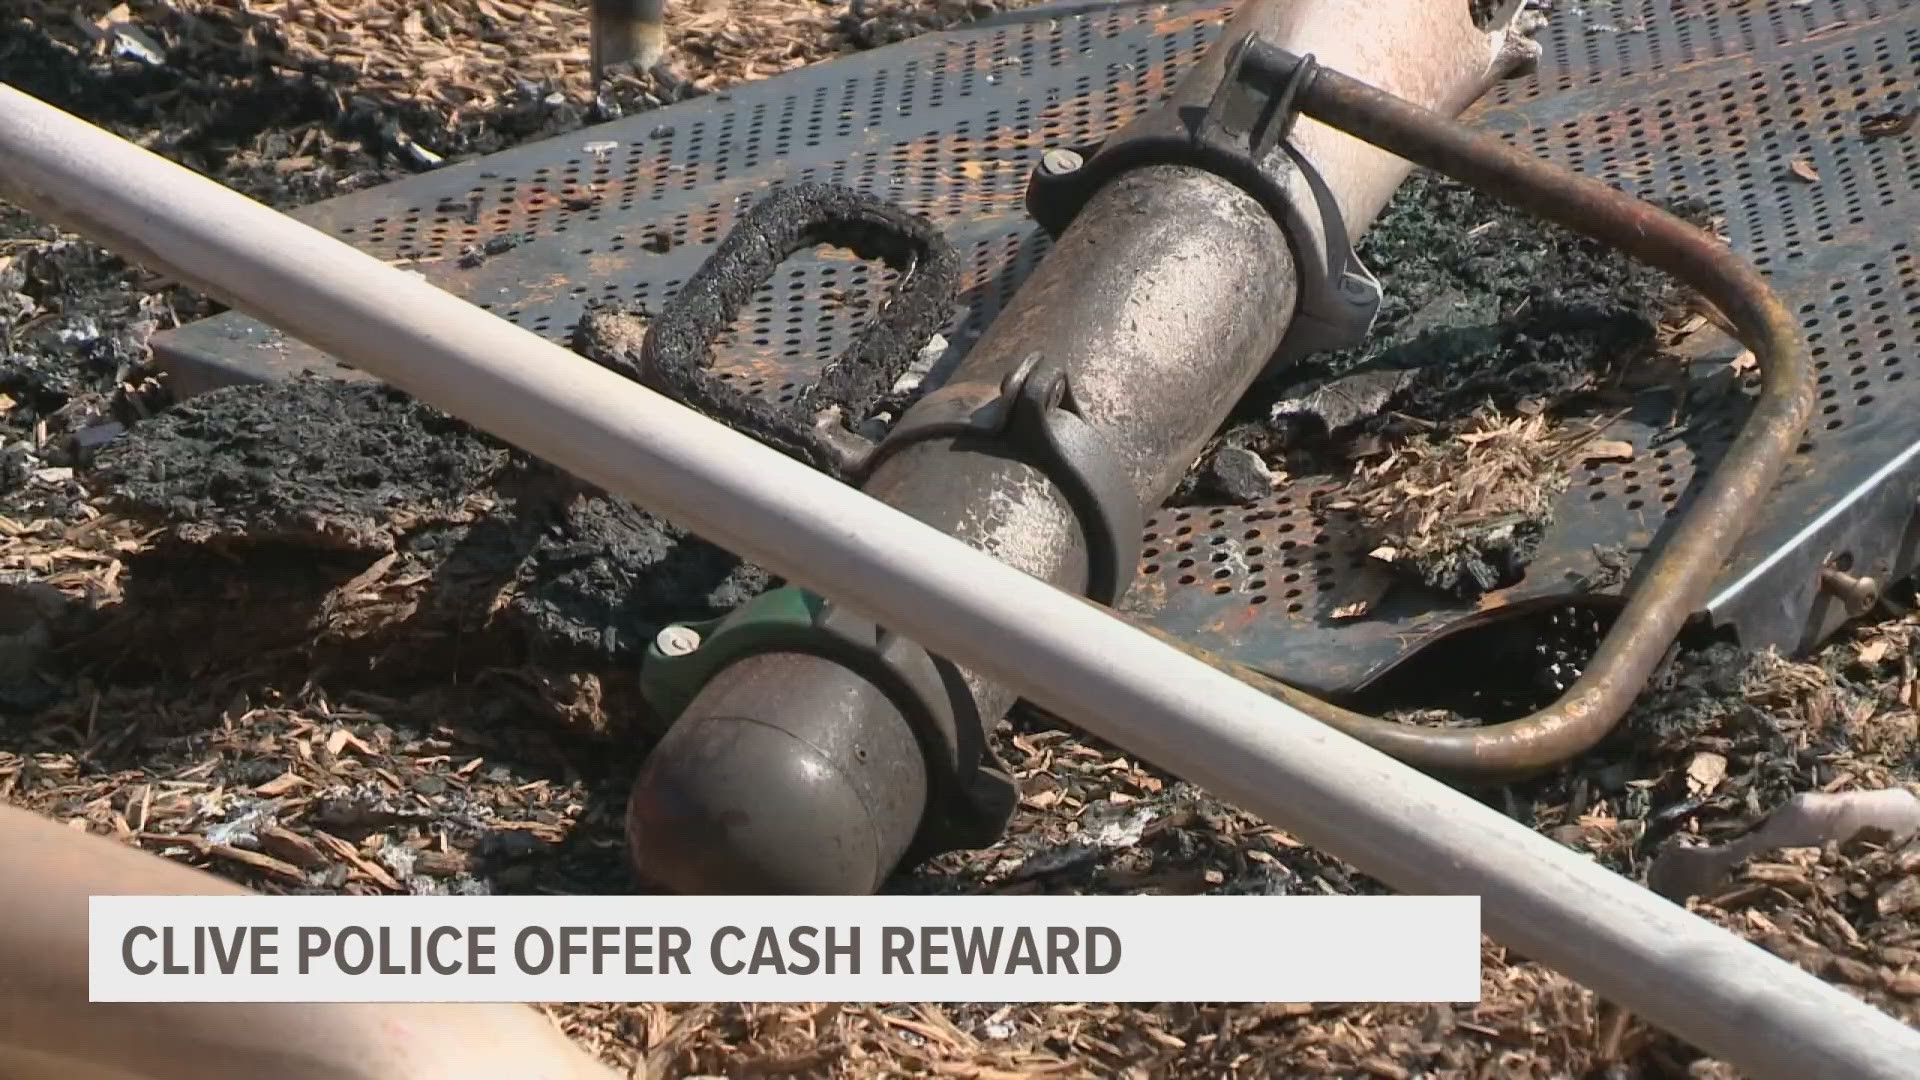 Police said the playground equipment at Stonegate Park is a total loss and will cost more than $100,000 to replace.